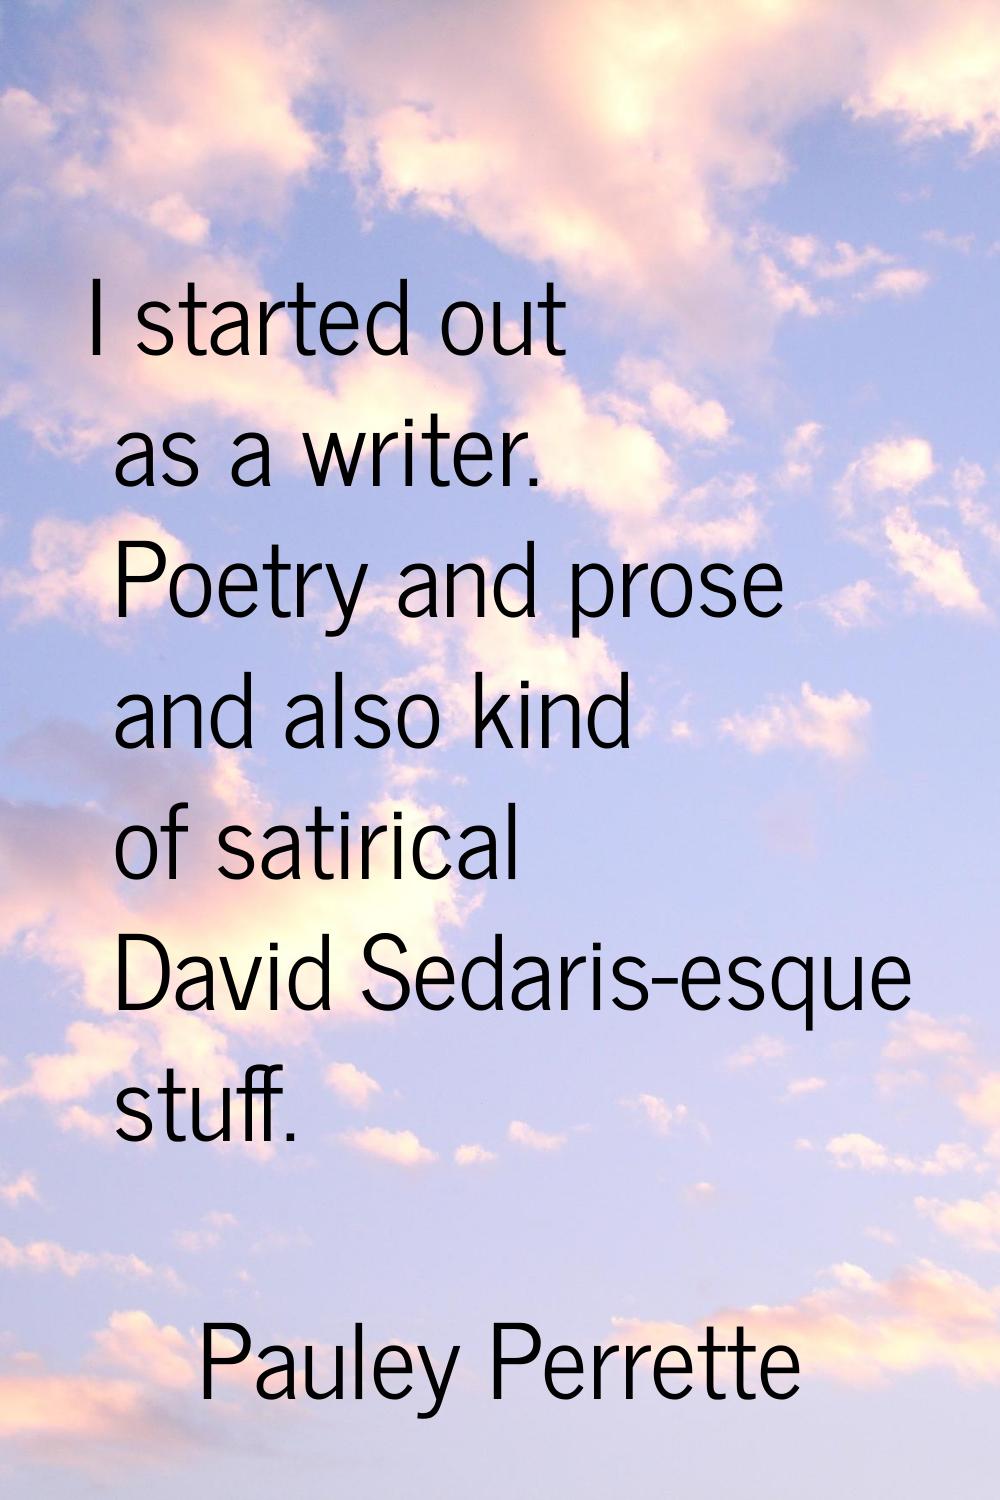 I started out as a writer. Poetry and prose and also kind of satirical David Sedaris-esque stuff.